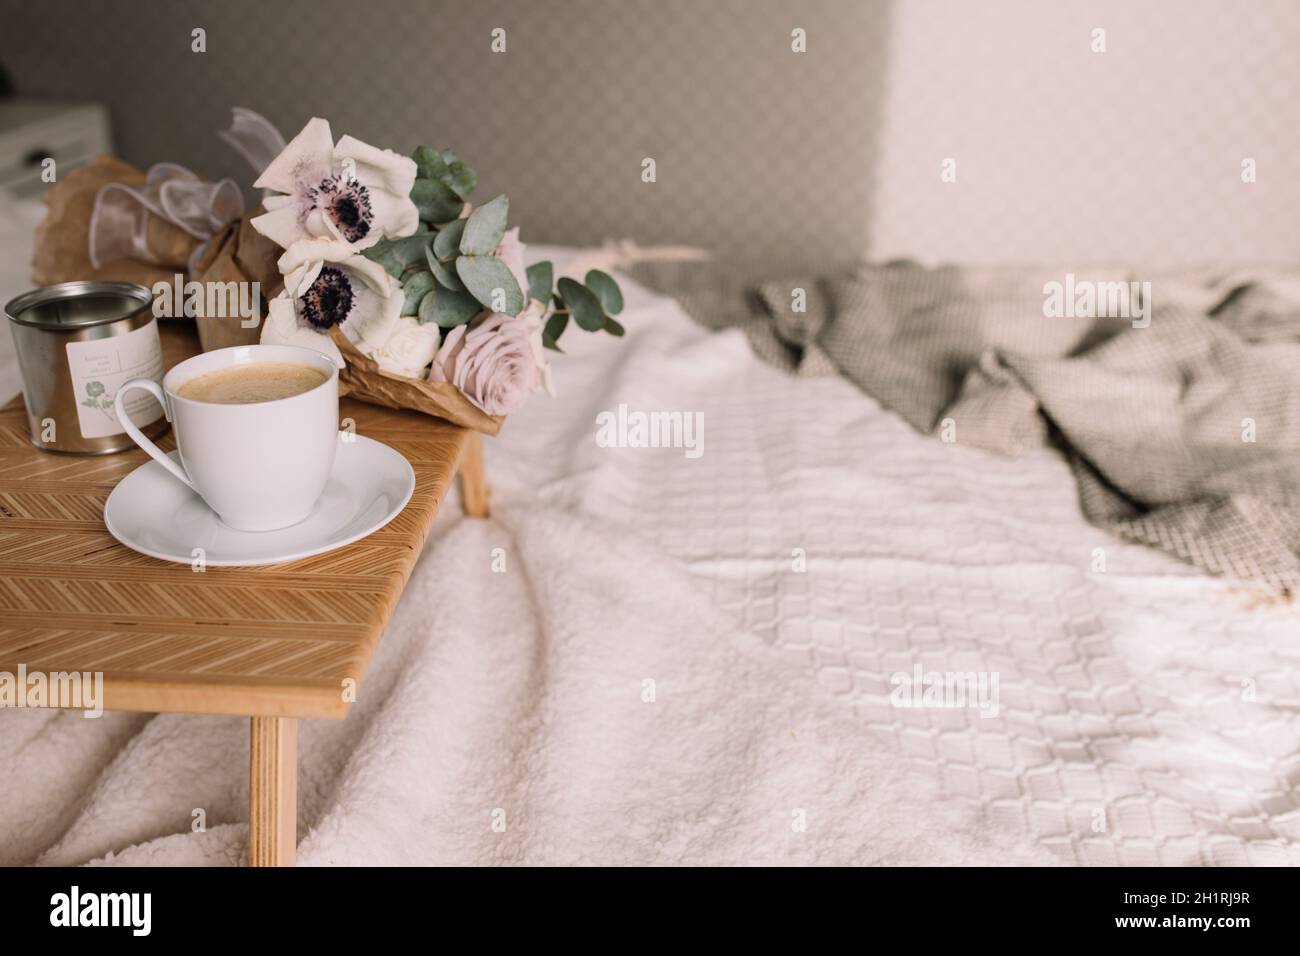 Romantic morning. Wooden coffee table with flowers on bed with plaid, coffee cup, flowers and candles. Lilac roses with eucalyptus and anemones. Inter Stock Photo